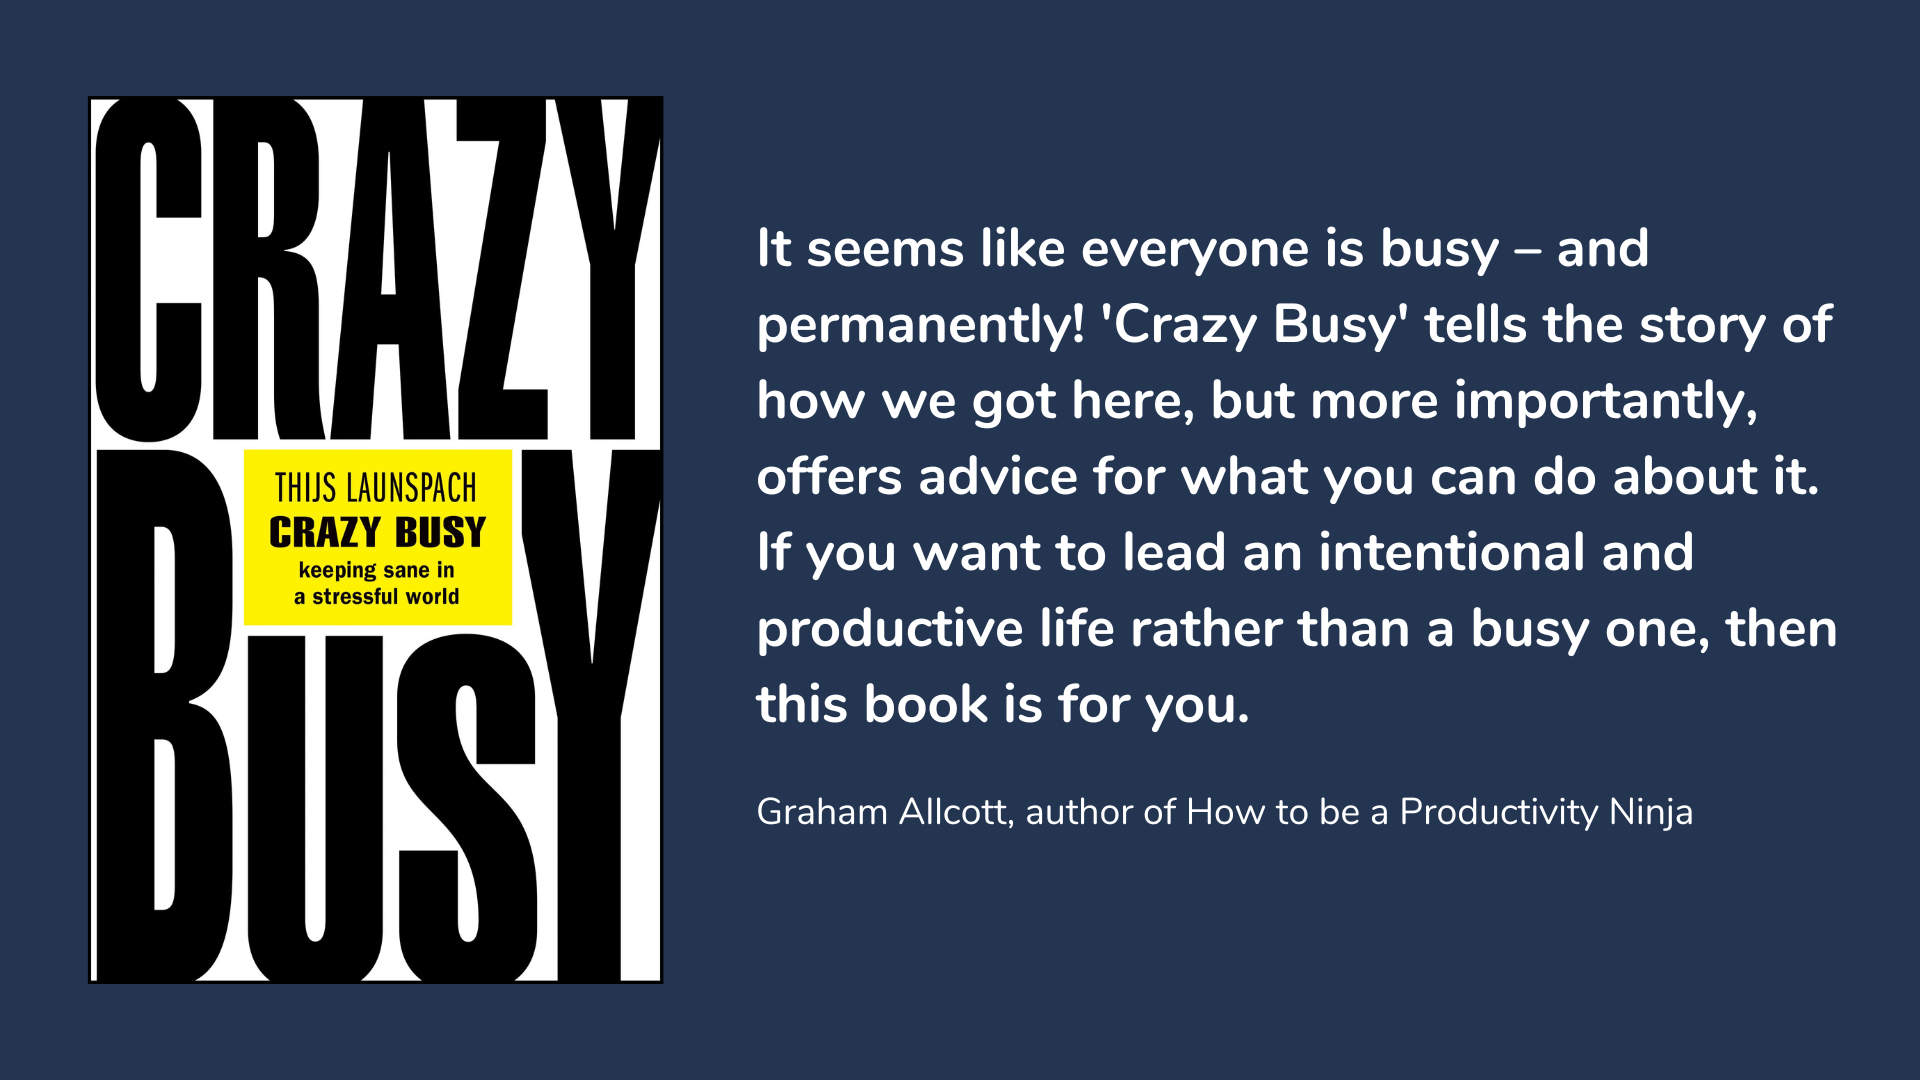 Crazy Busy: Keeping Sane in a Stressful World, book cover and description.